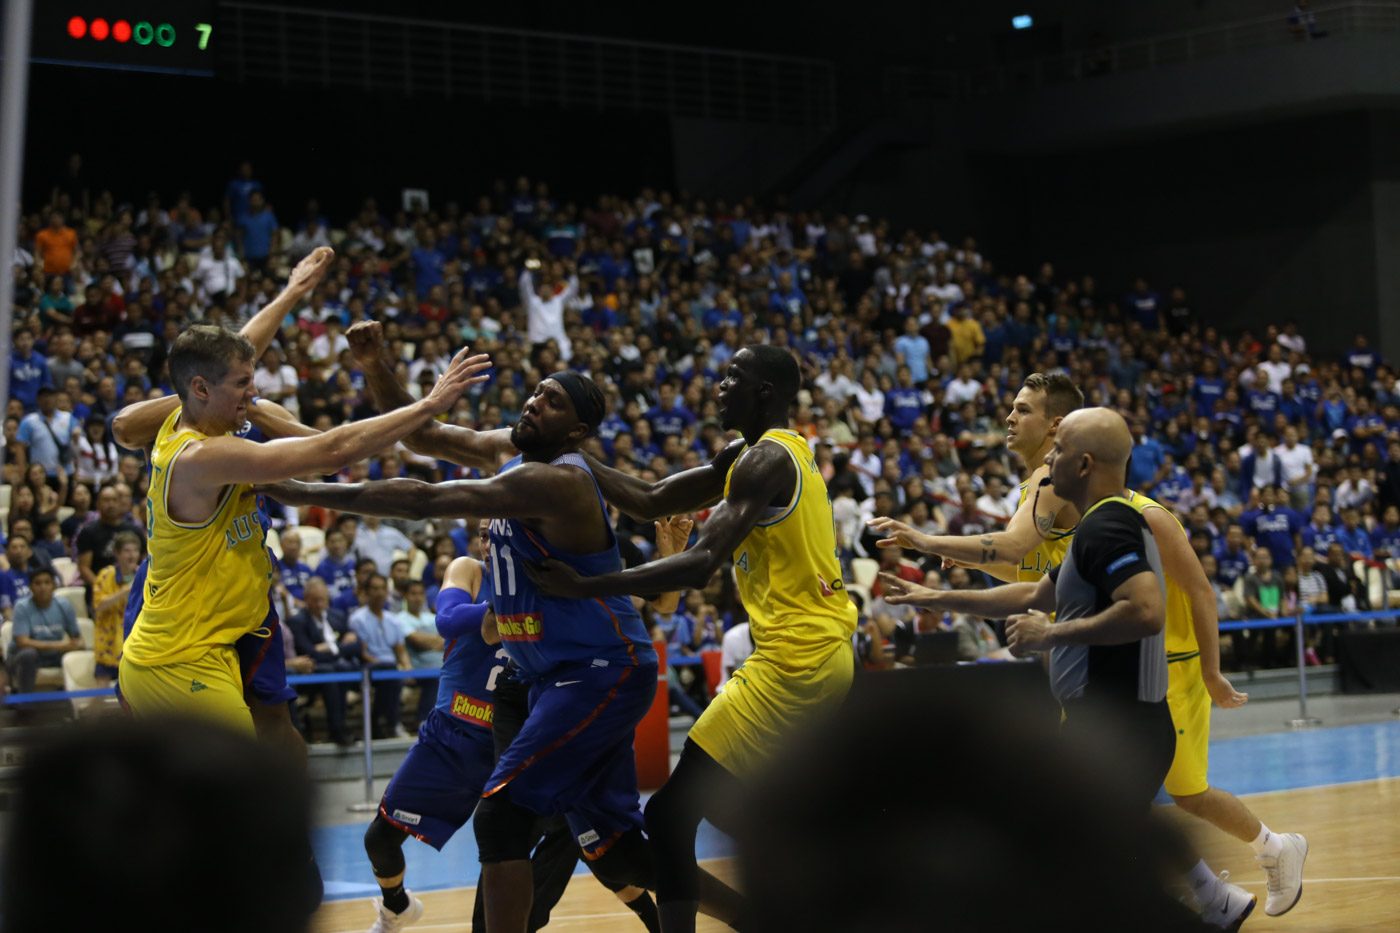 Malacañang on FIBA brawl: ‘Height of being unsportsmanlike’